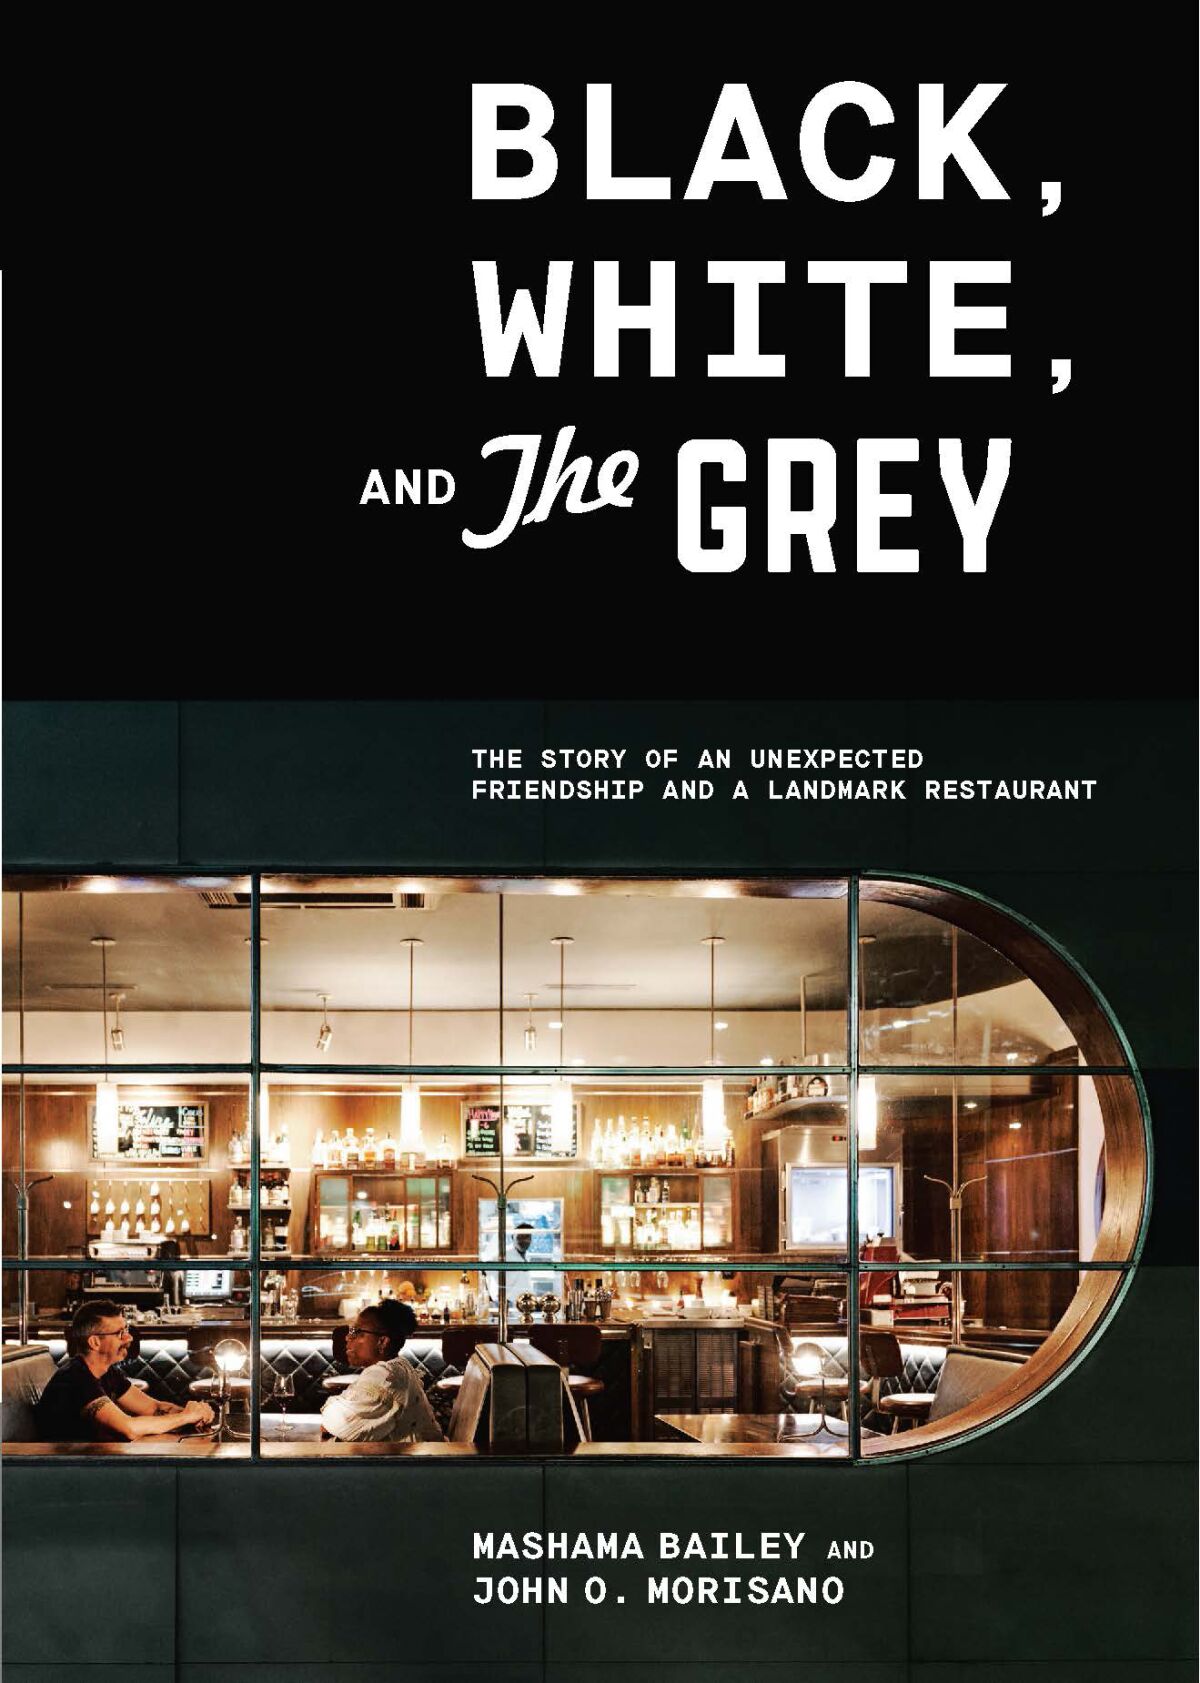 Cover of the book "Black, White, and the Grey" by Mashama Bailey and John O. Morisano.